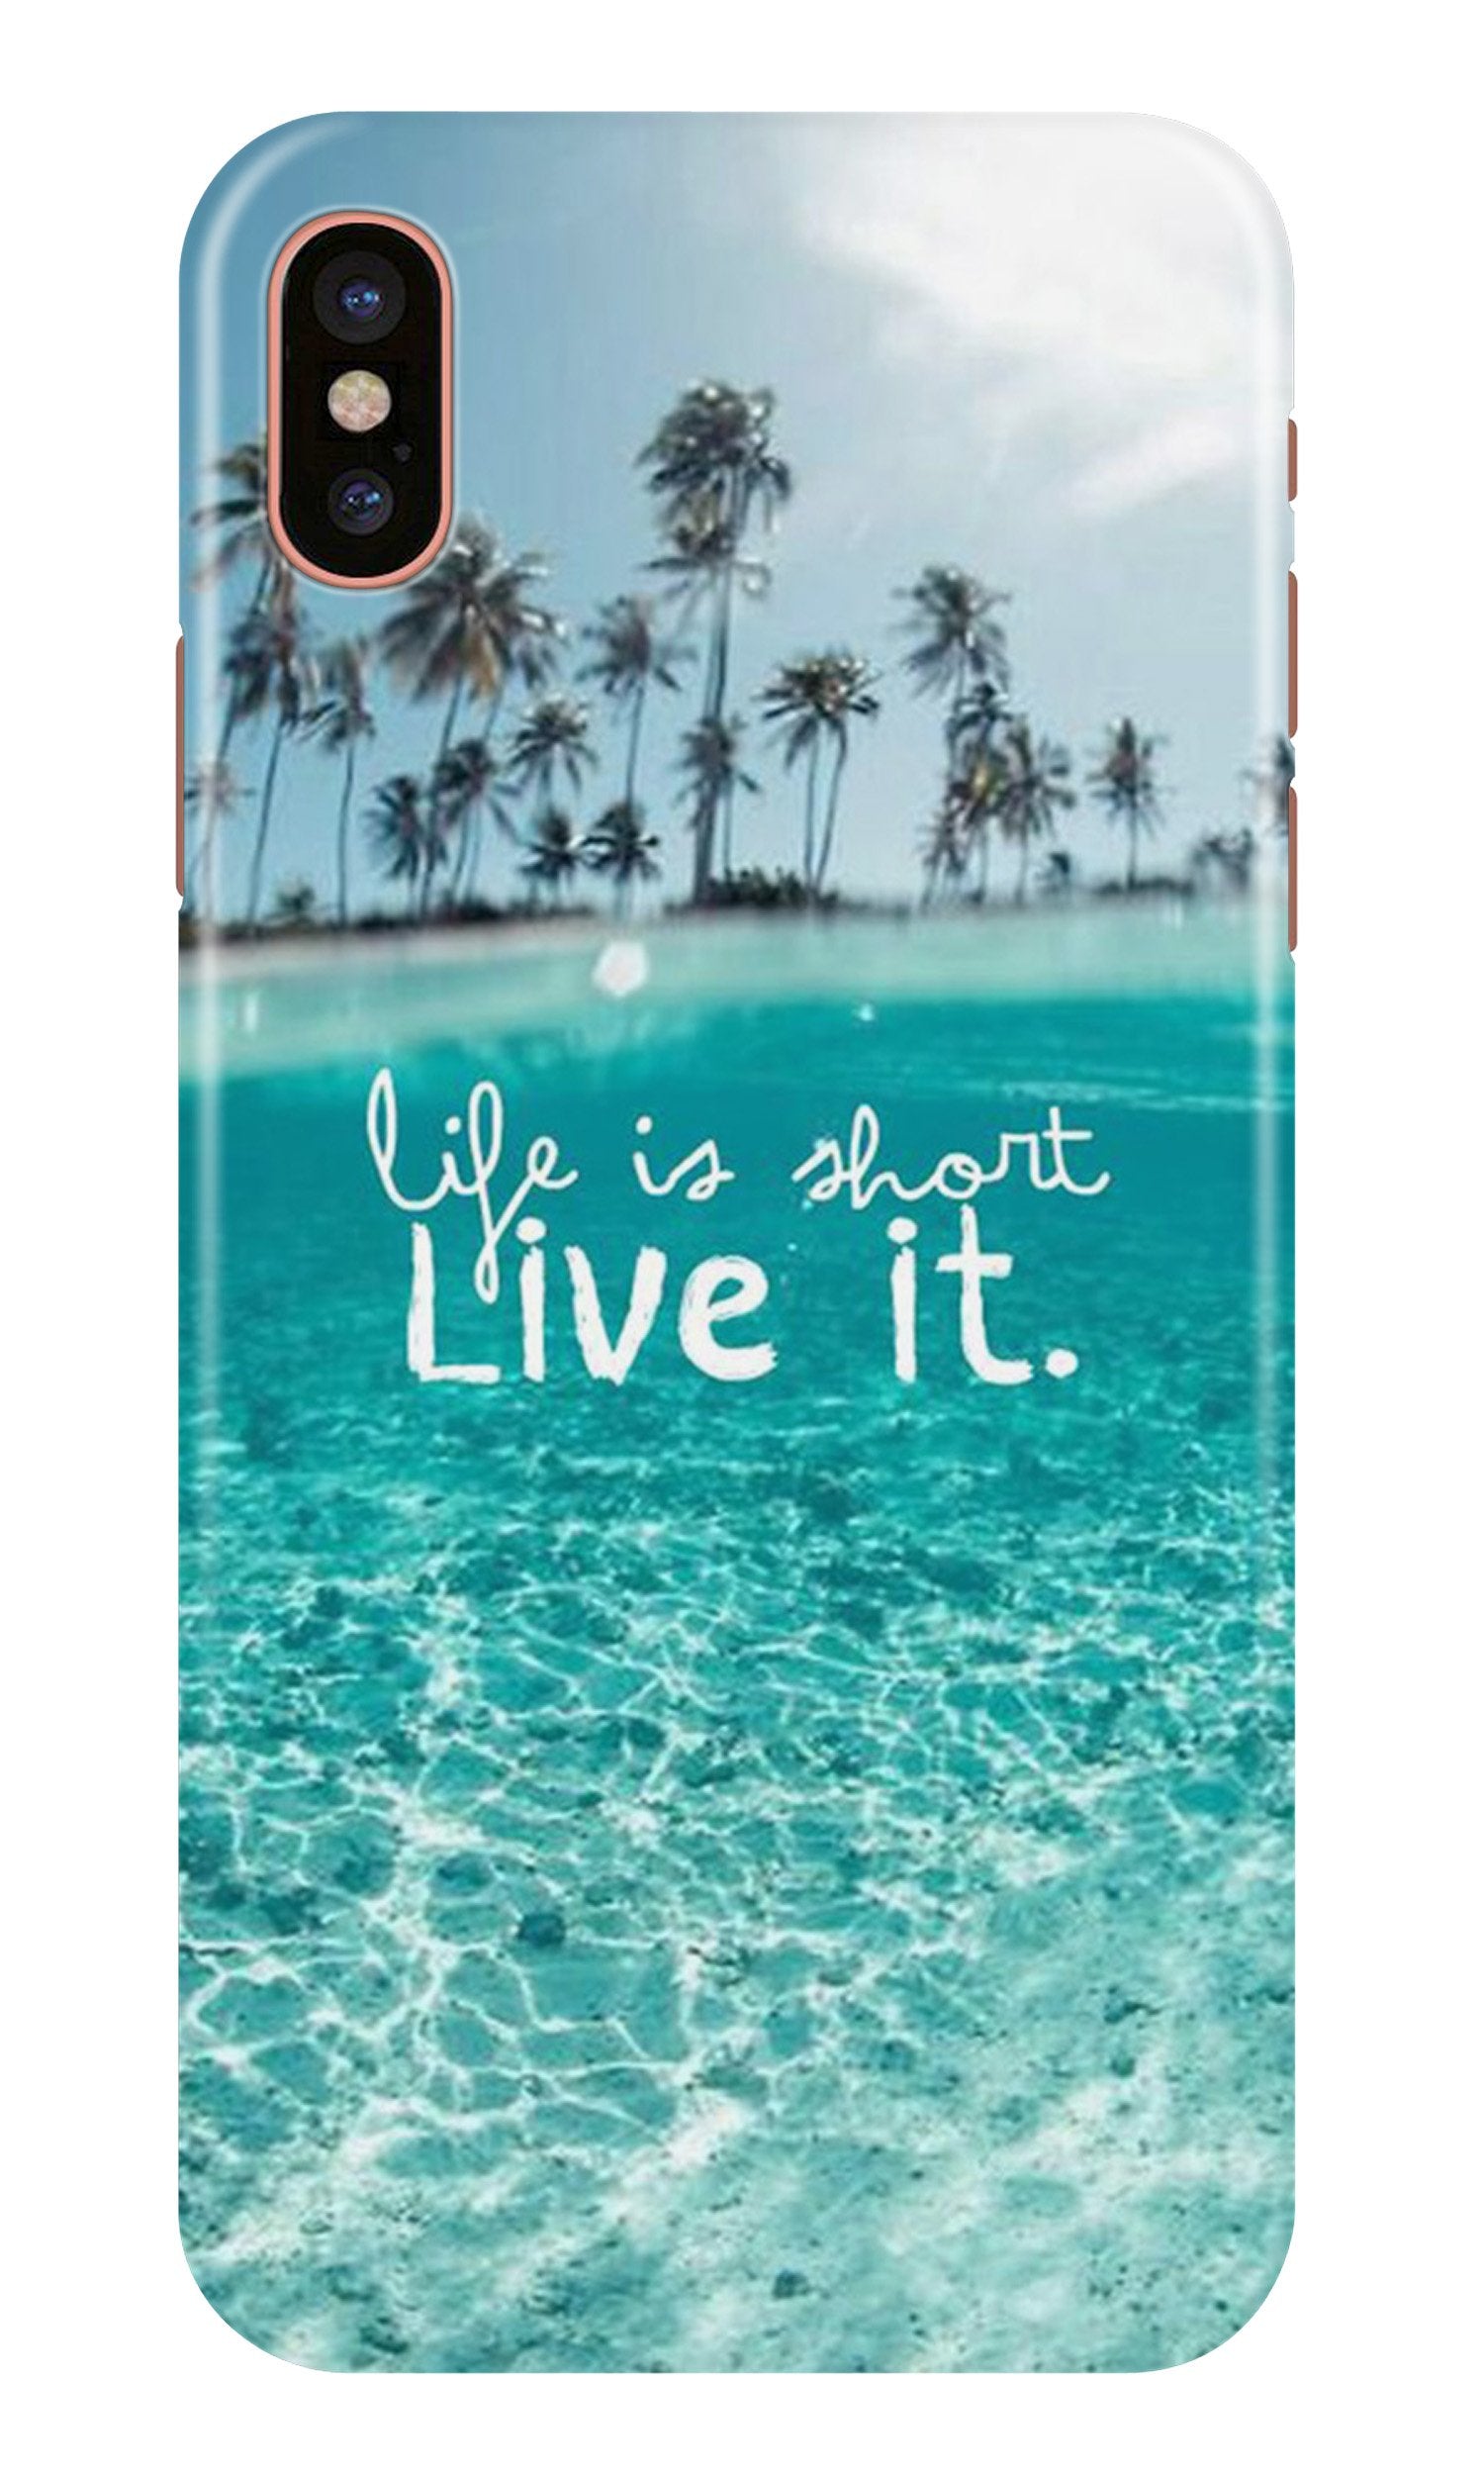 Life is short live it Case for iPhone X